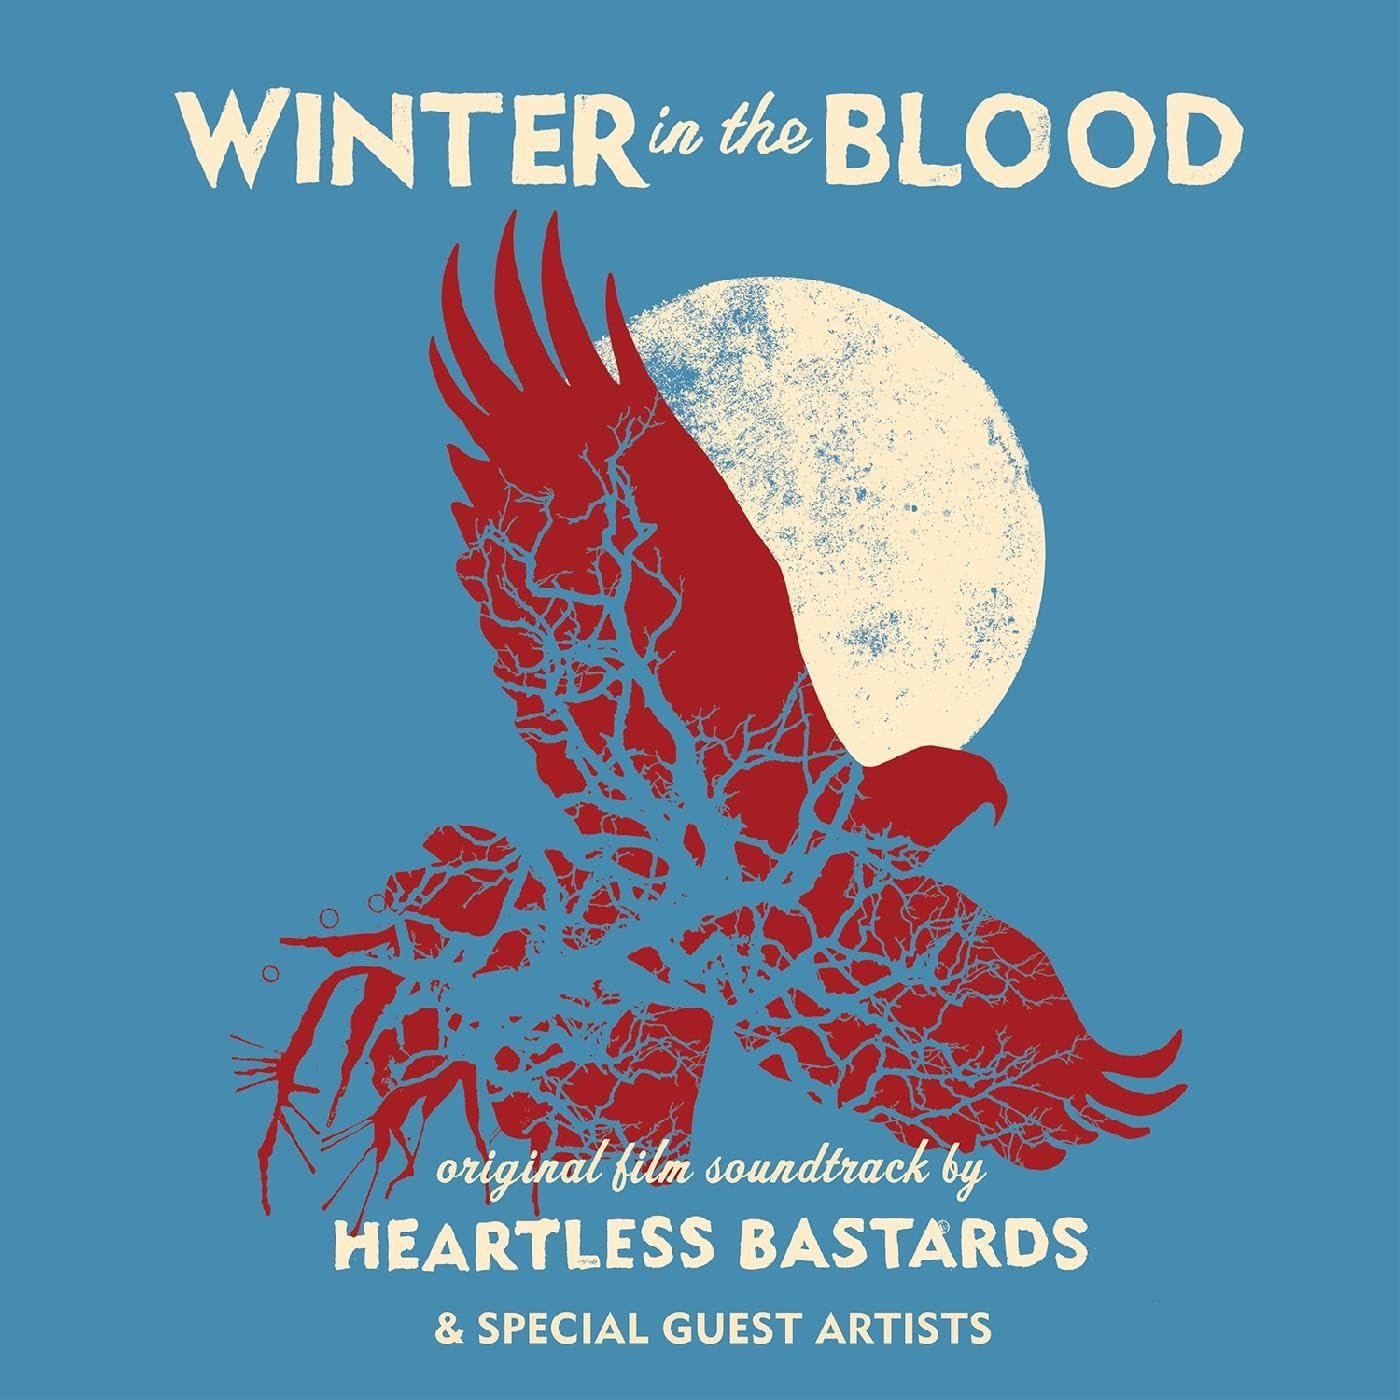 CD Shop - HEARTLESS BASTARDS WINTER IN THE BLOOD